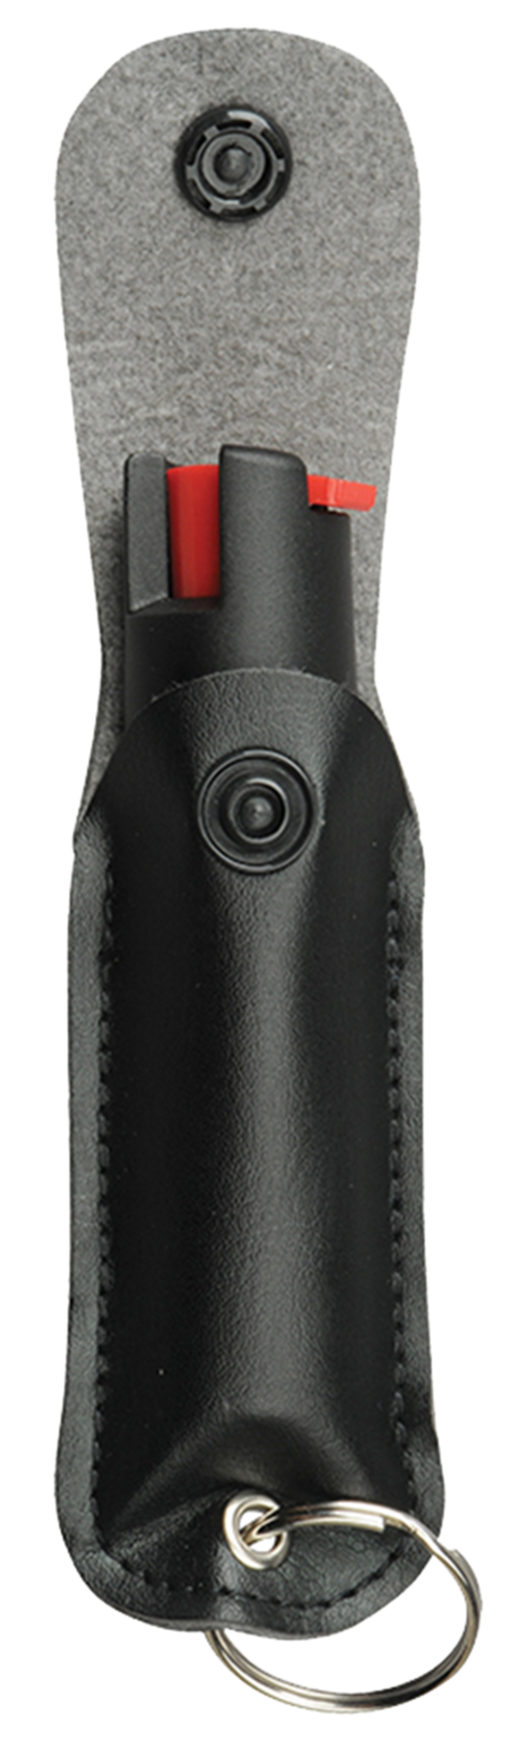 Ruger Personal Defense RKS091 Key Chain Pepper Spray Keychain .388 oz Close Contact Black